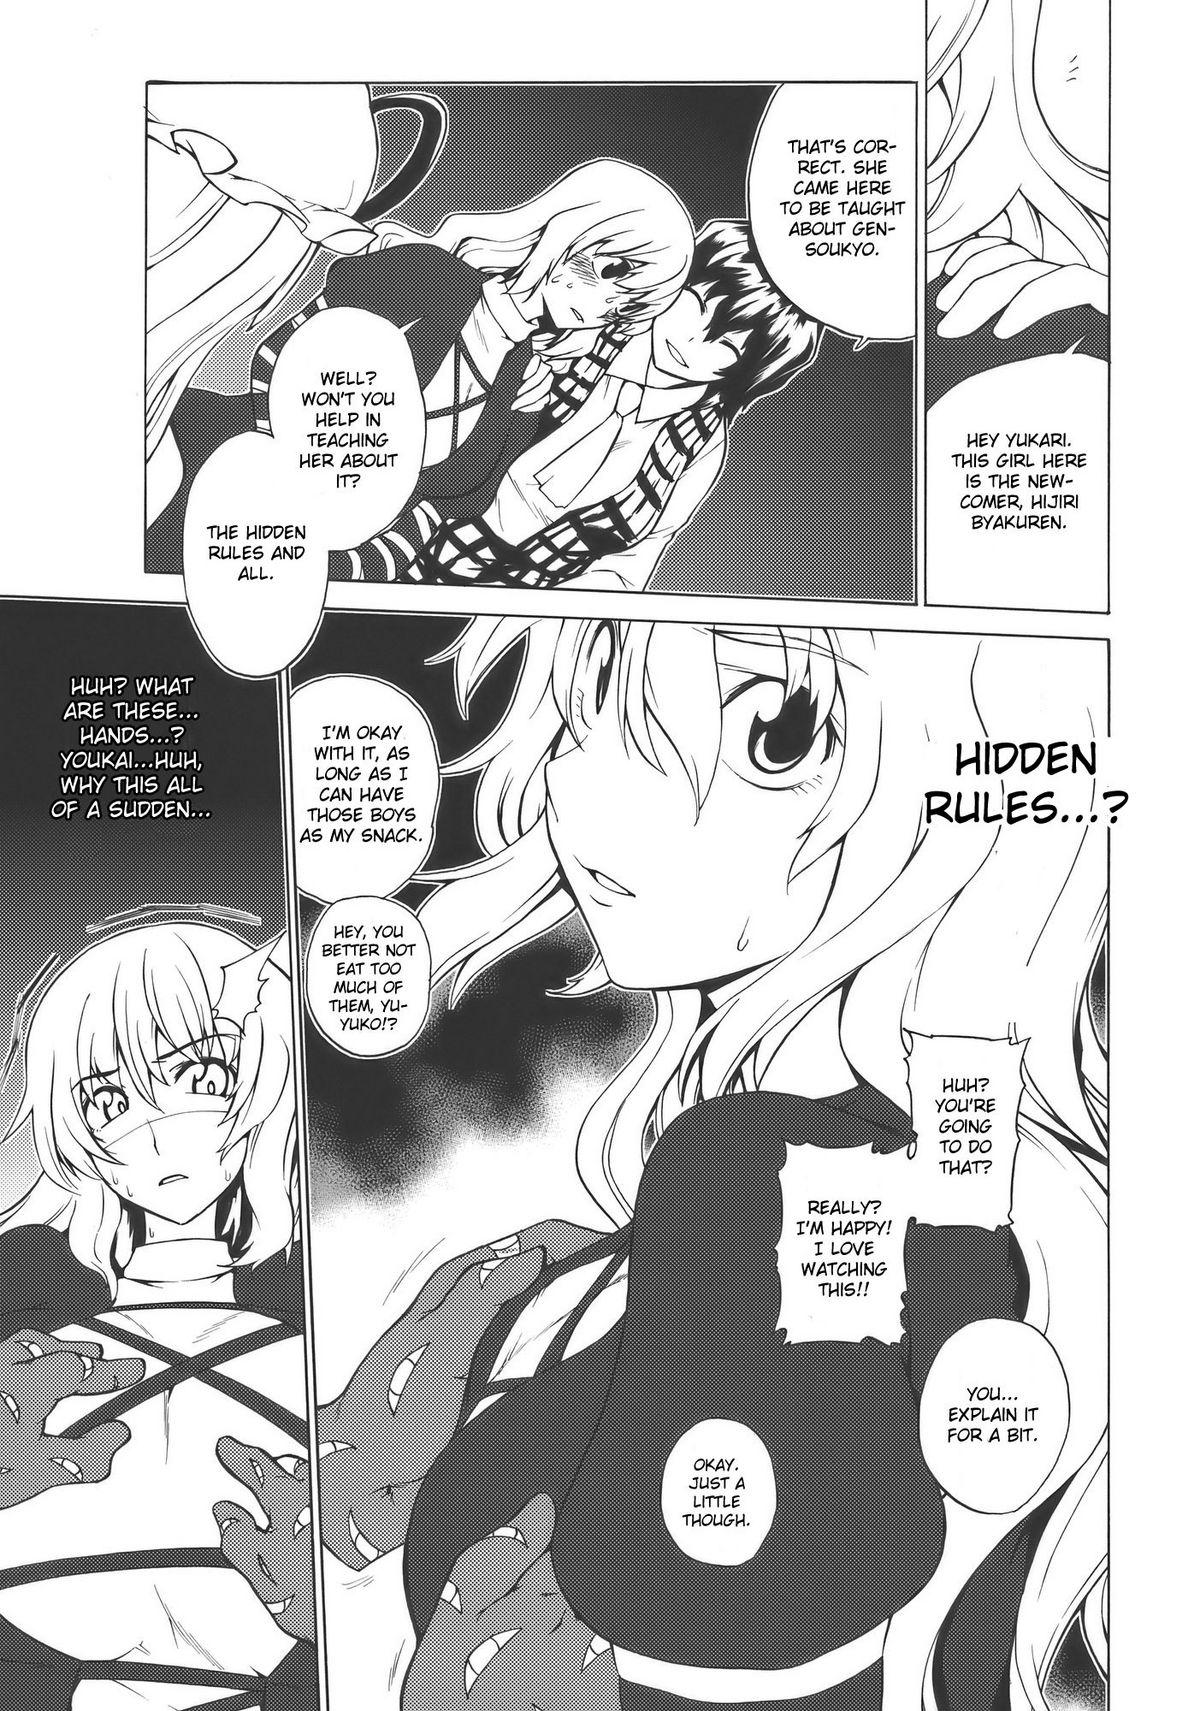 Juicy Playing Gensoukyou Now - Touhou project Roleplay - Page 9